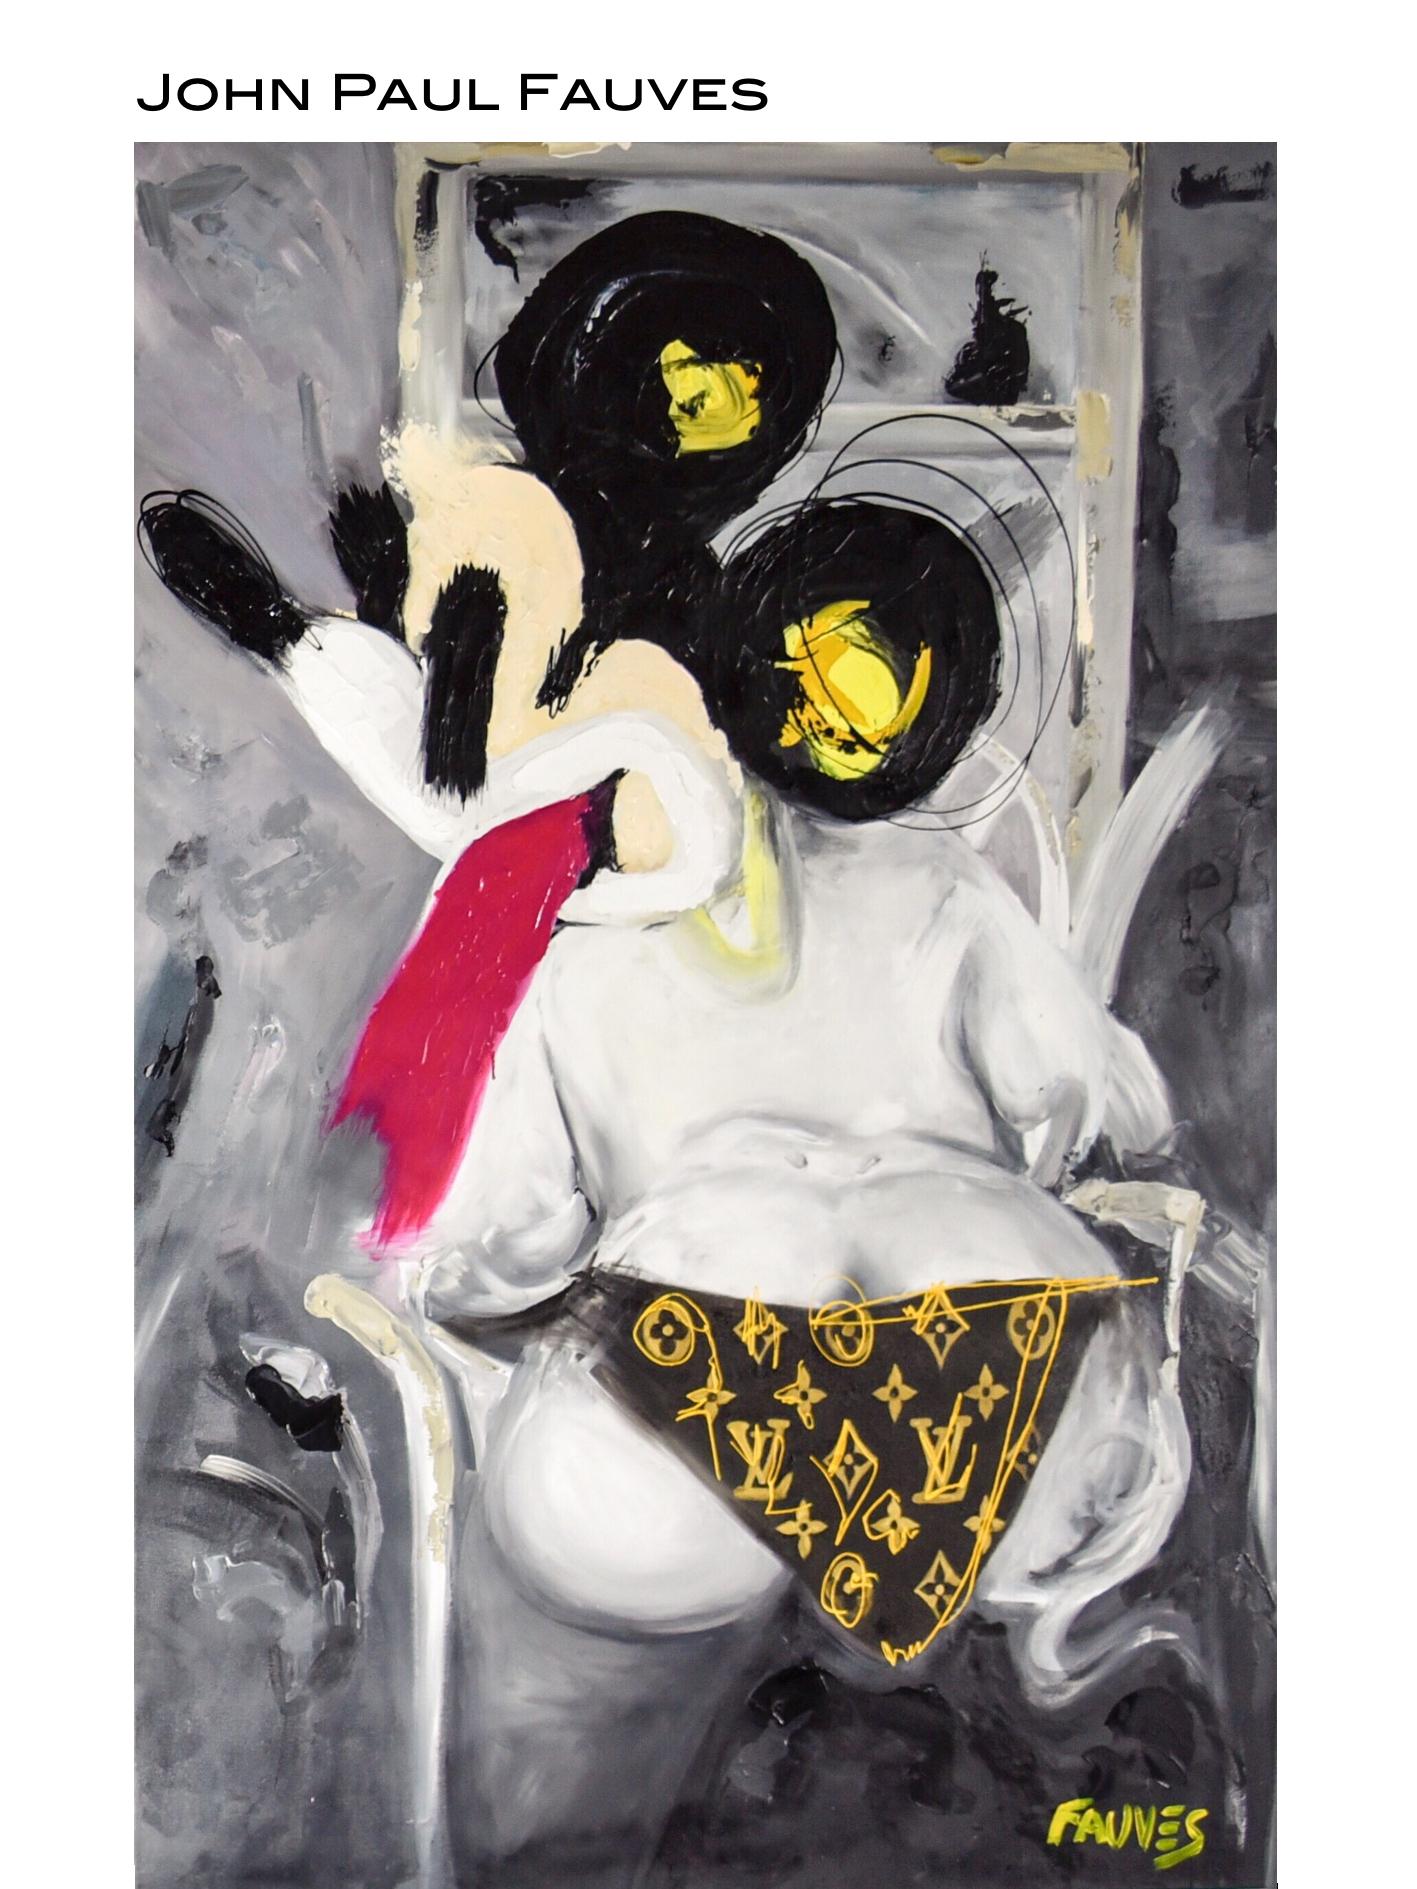 Mickey Under Louis - Painting by John Paul Fauves